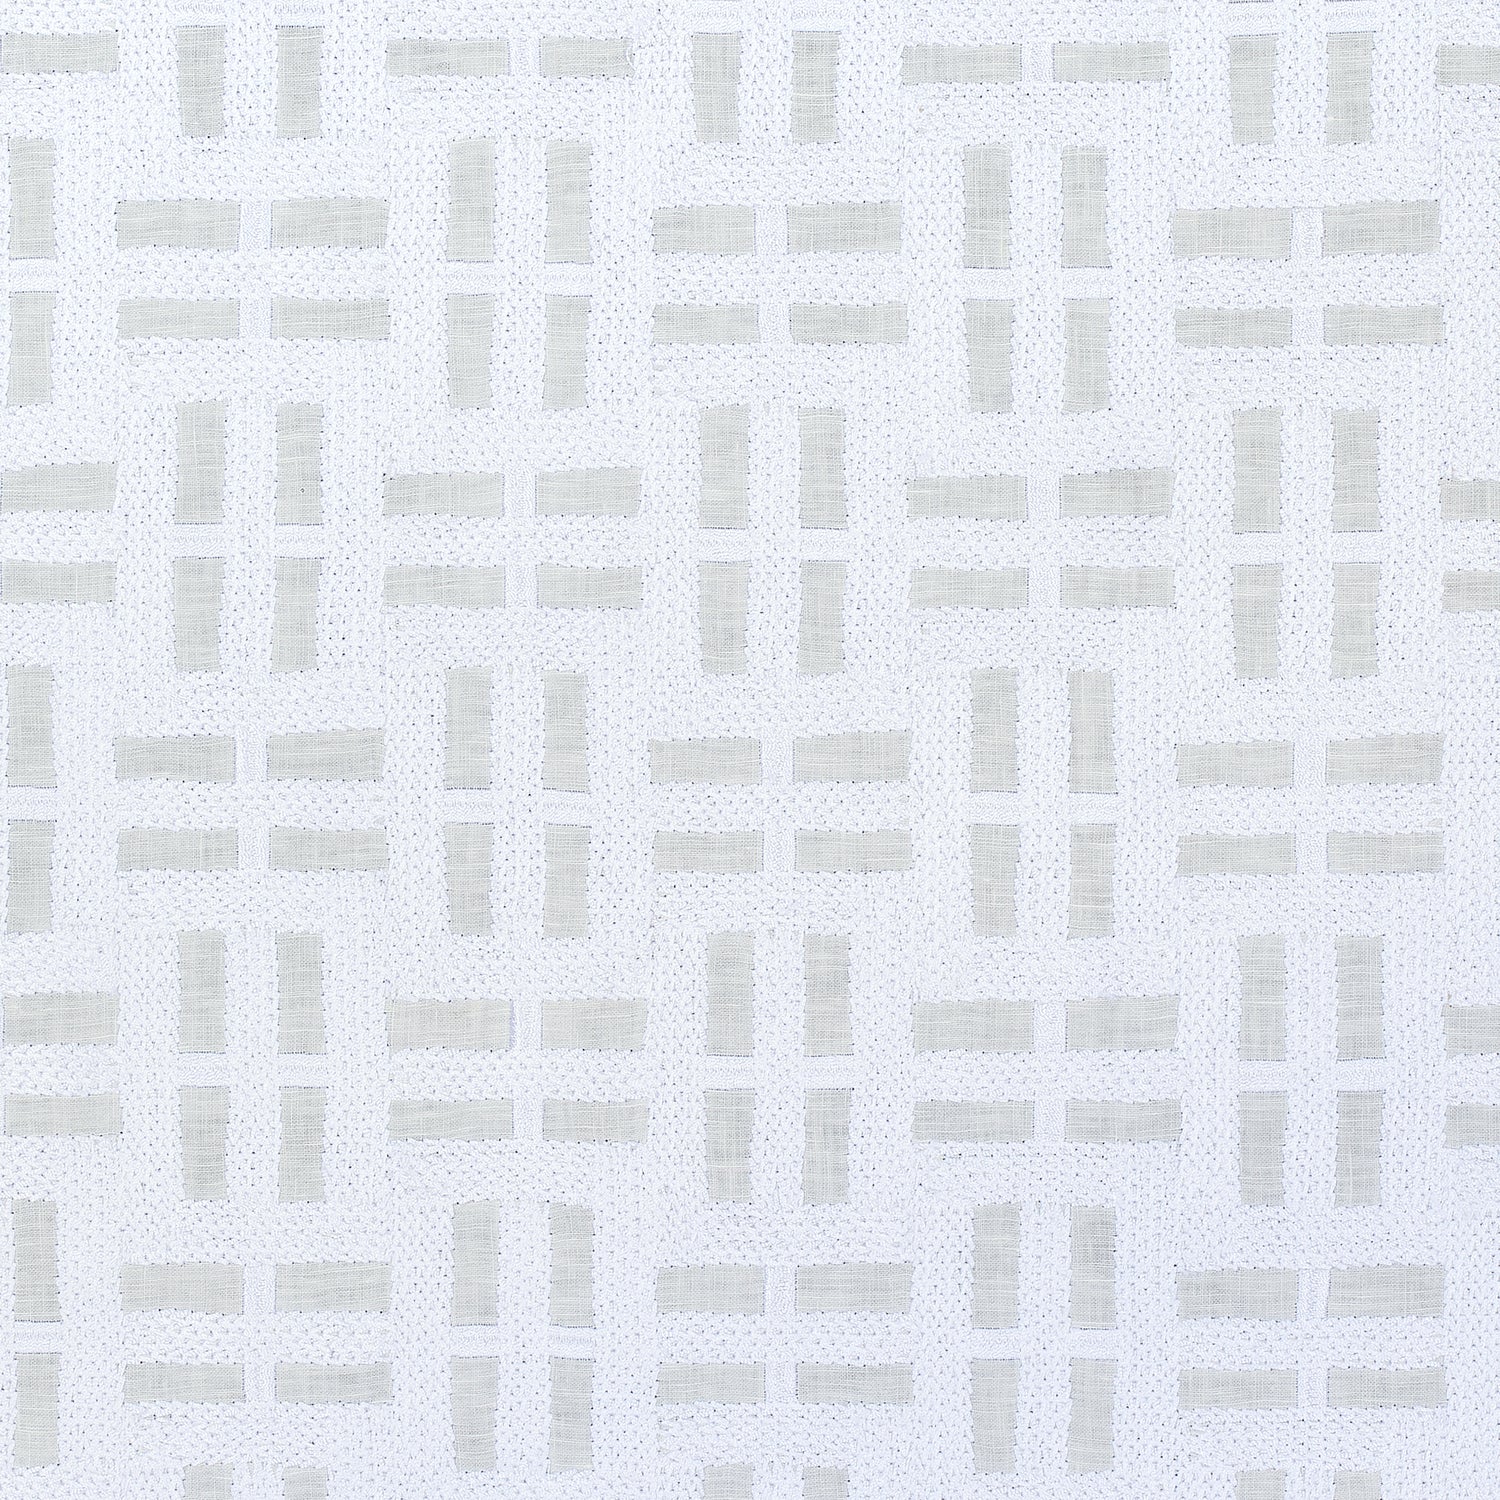 Lock Embroidery fabric in white color - pattern number AW73000 - by Anna French in the Meridian collection